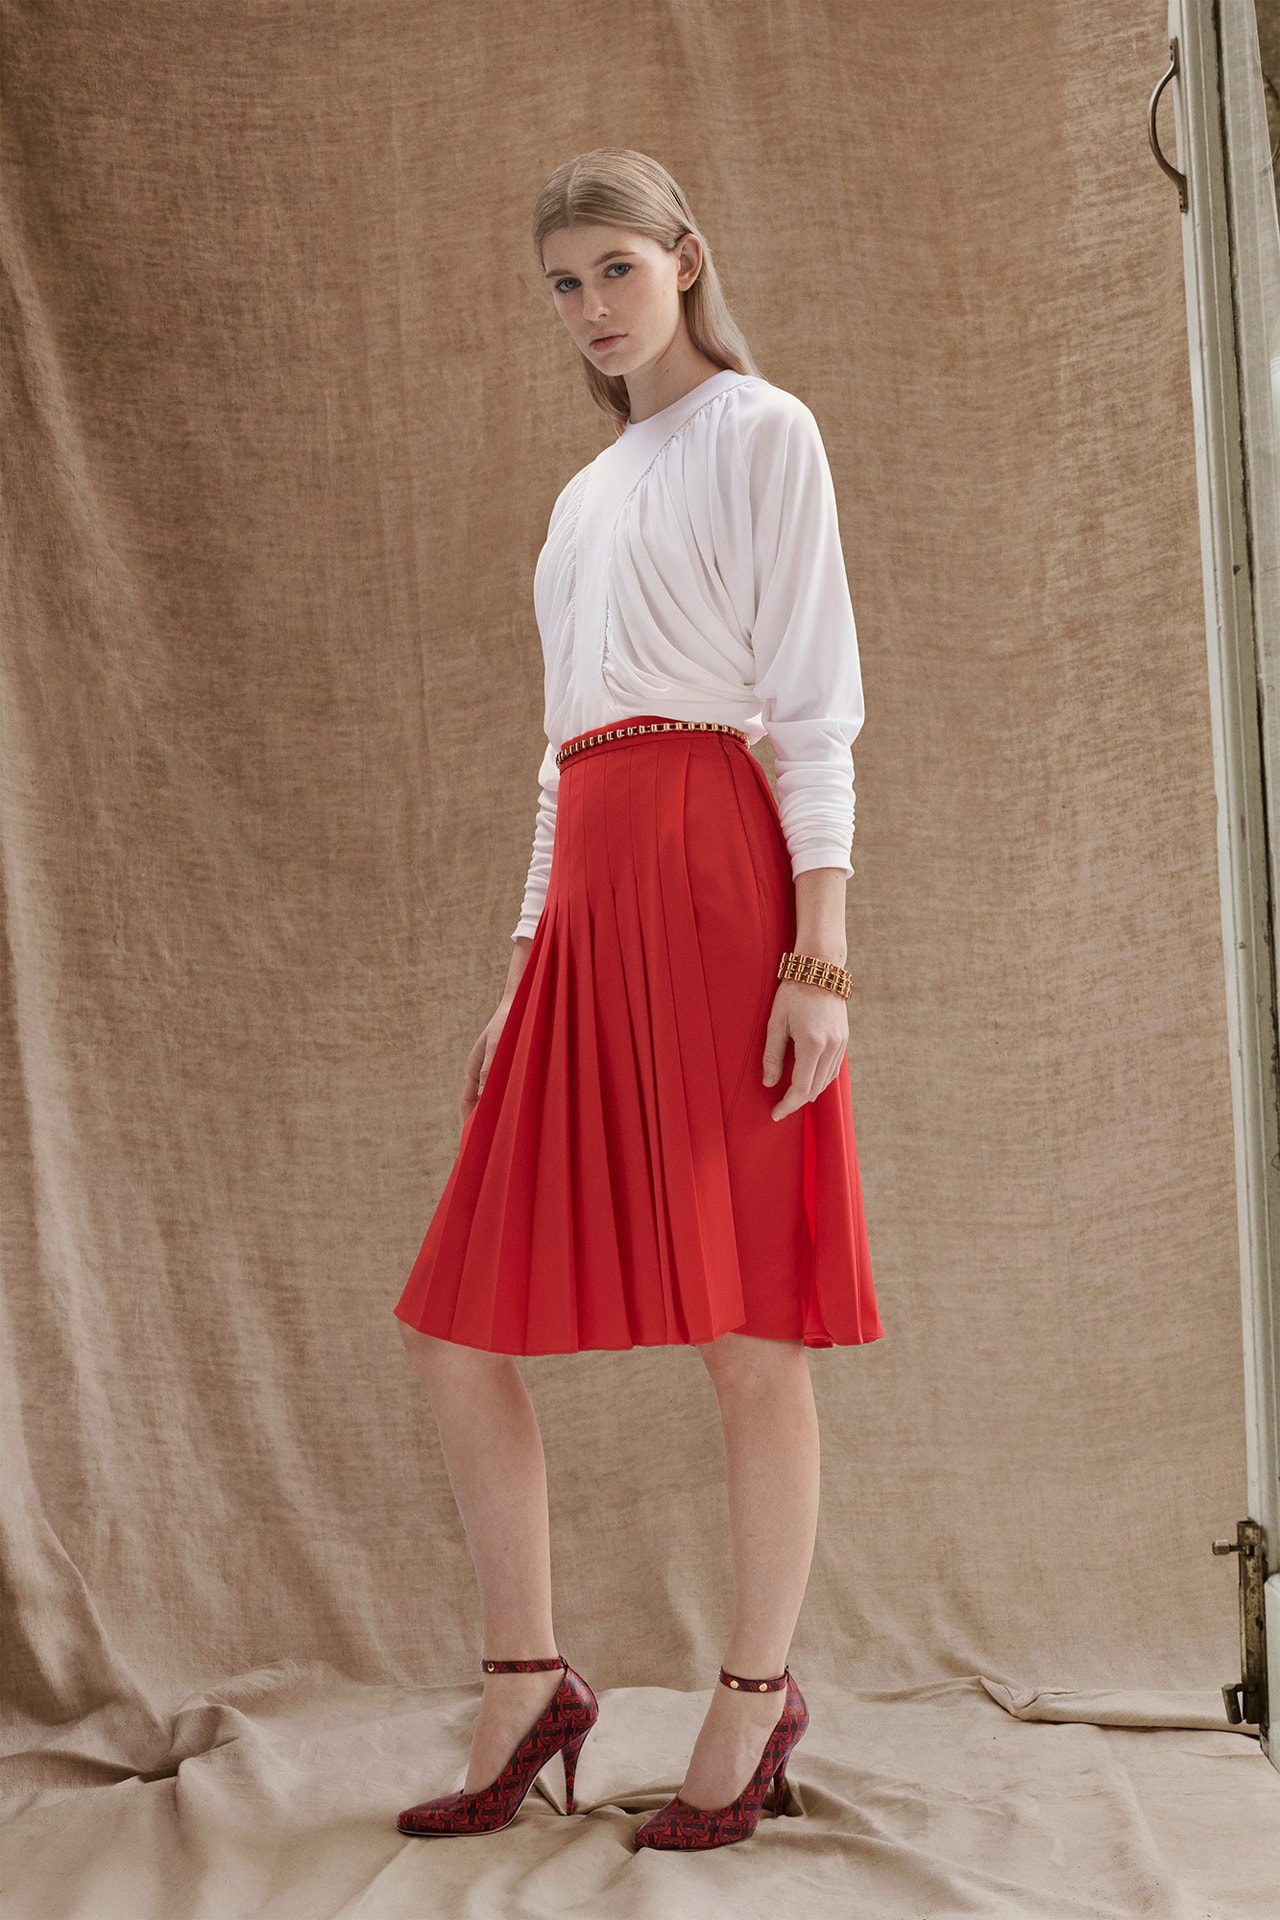 Burberry Riccardo Tisci Pre-Fall 2019 Collection Top White Skirt Red